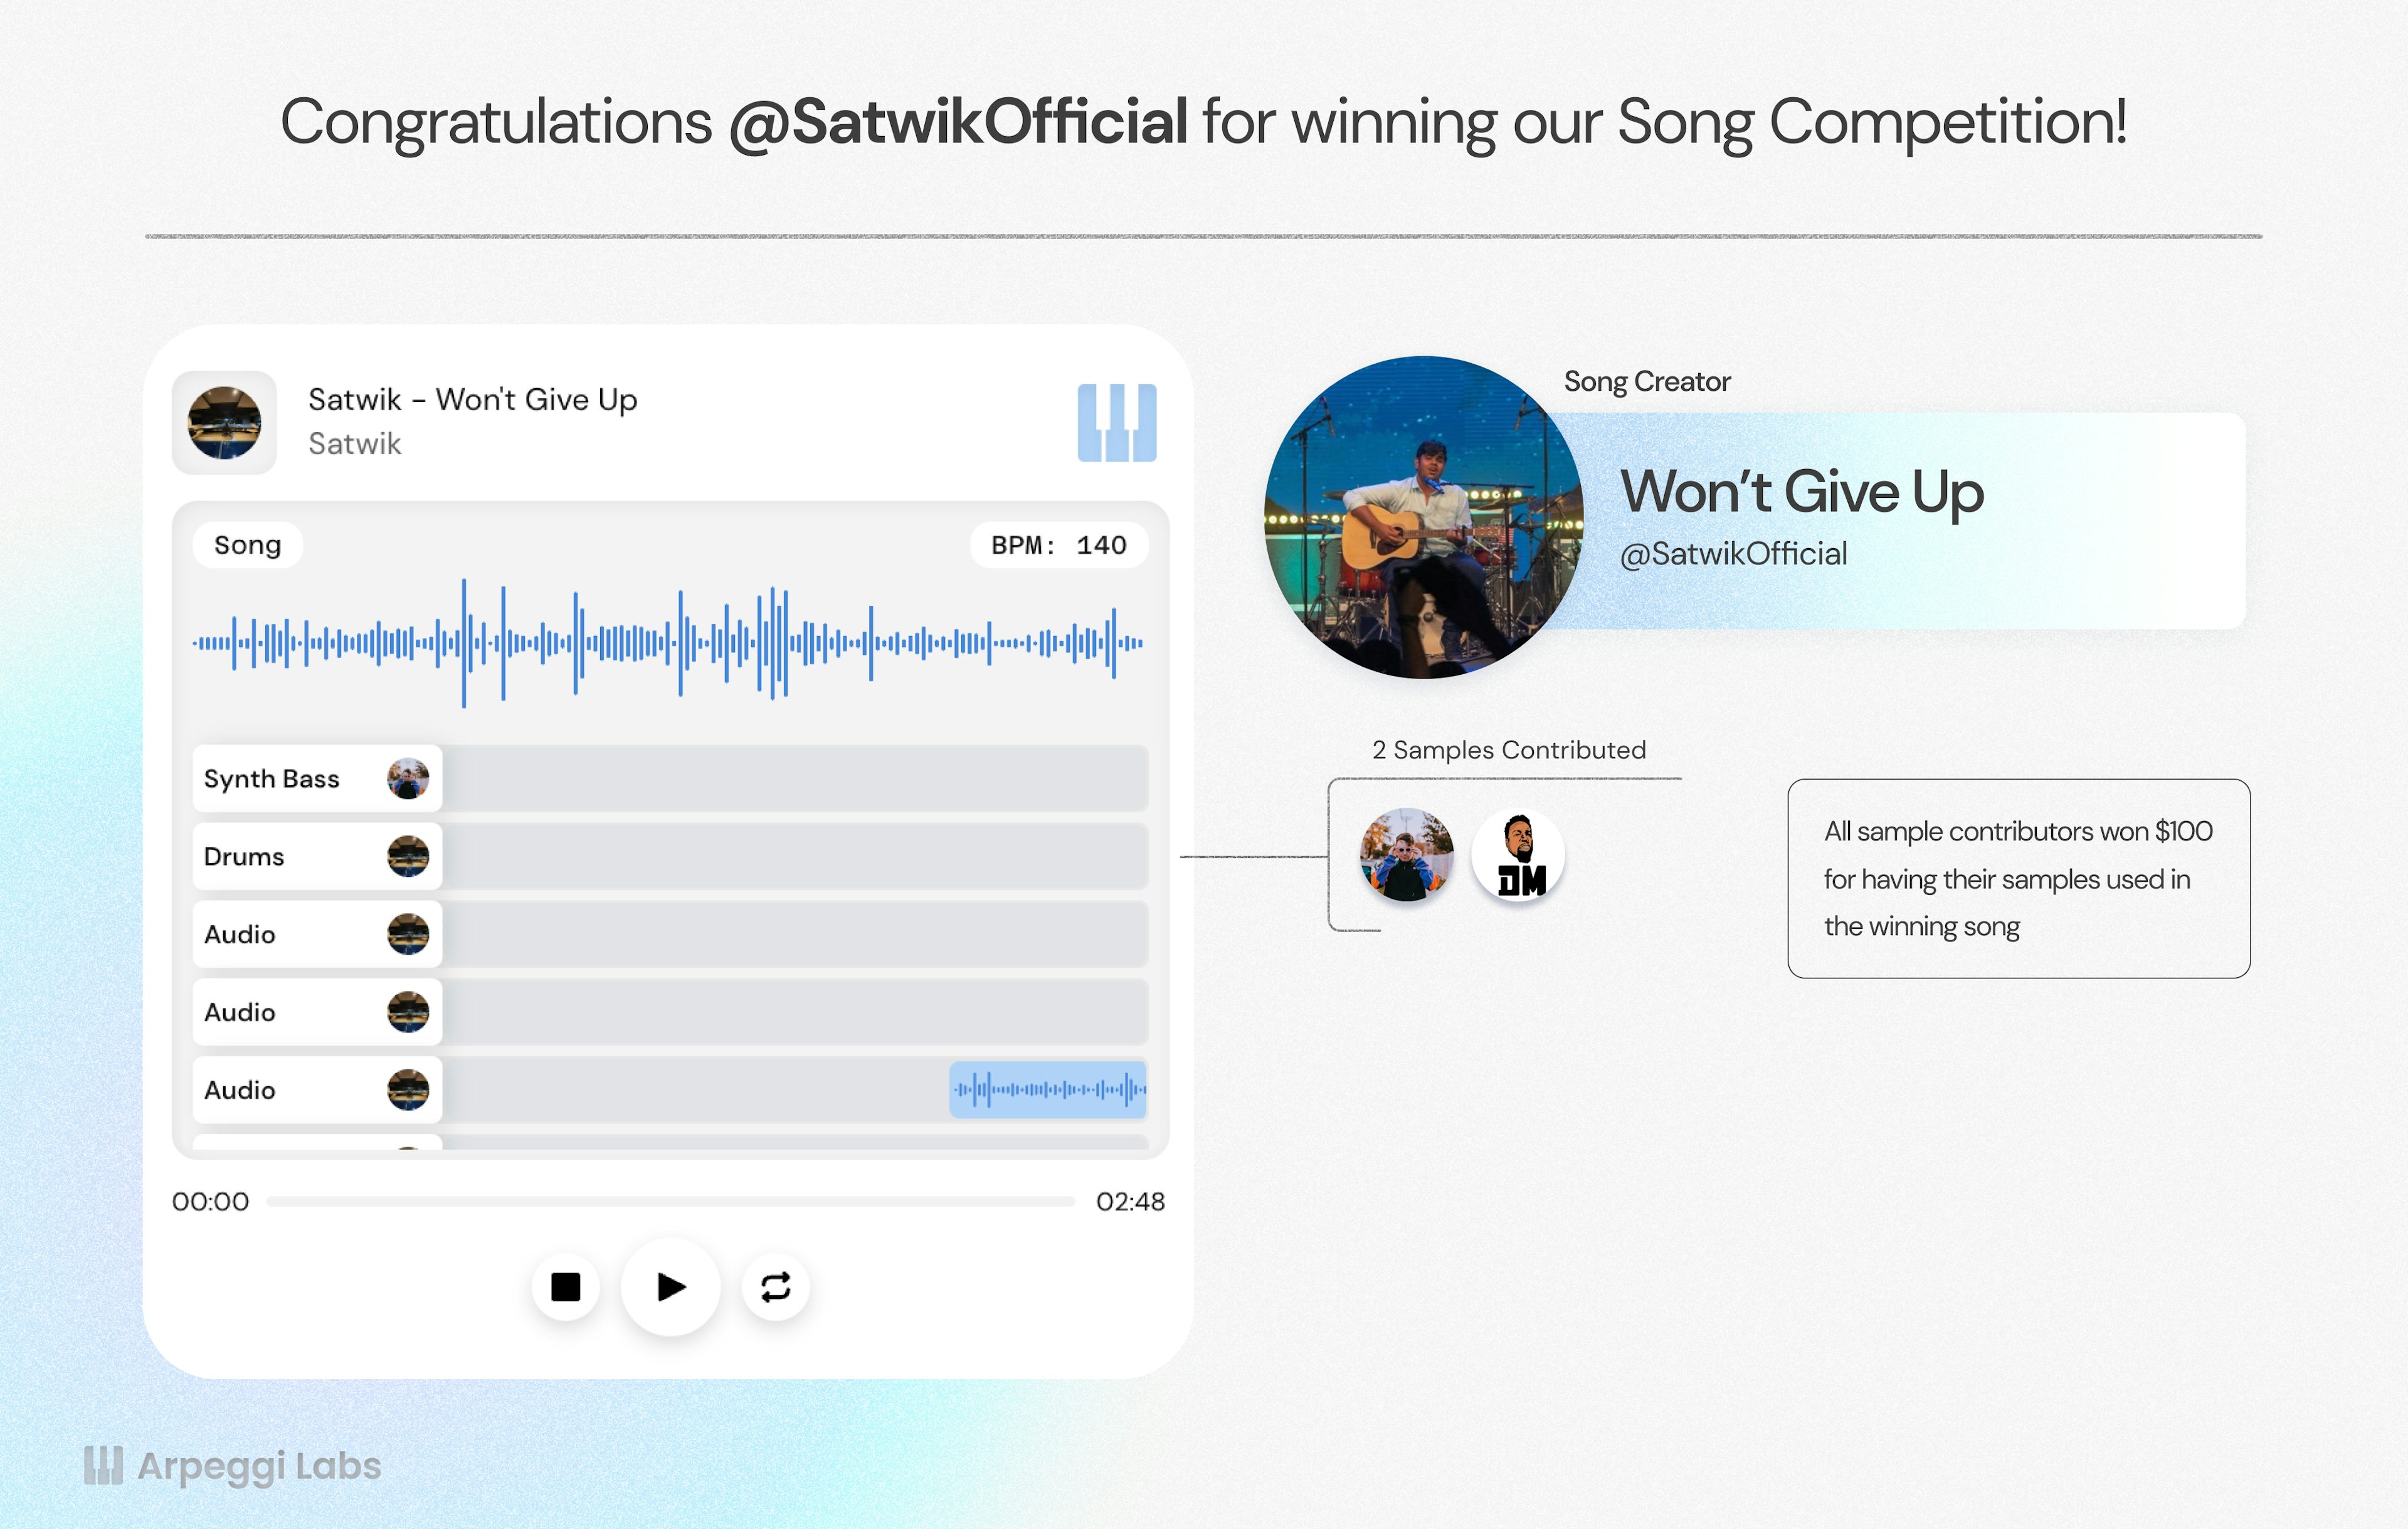 'Won't Give Up' by @SatwikOfficial won our Sep22 Song Competition